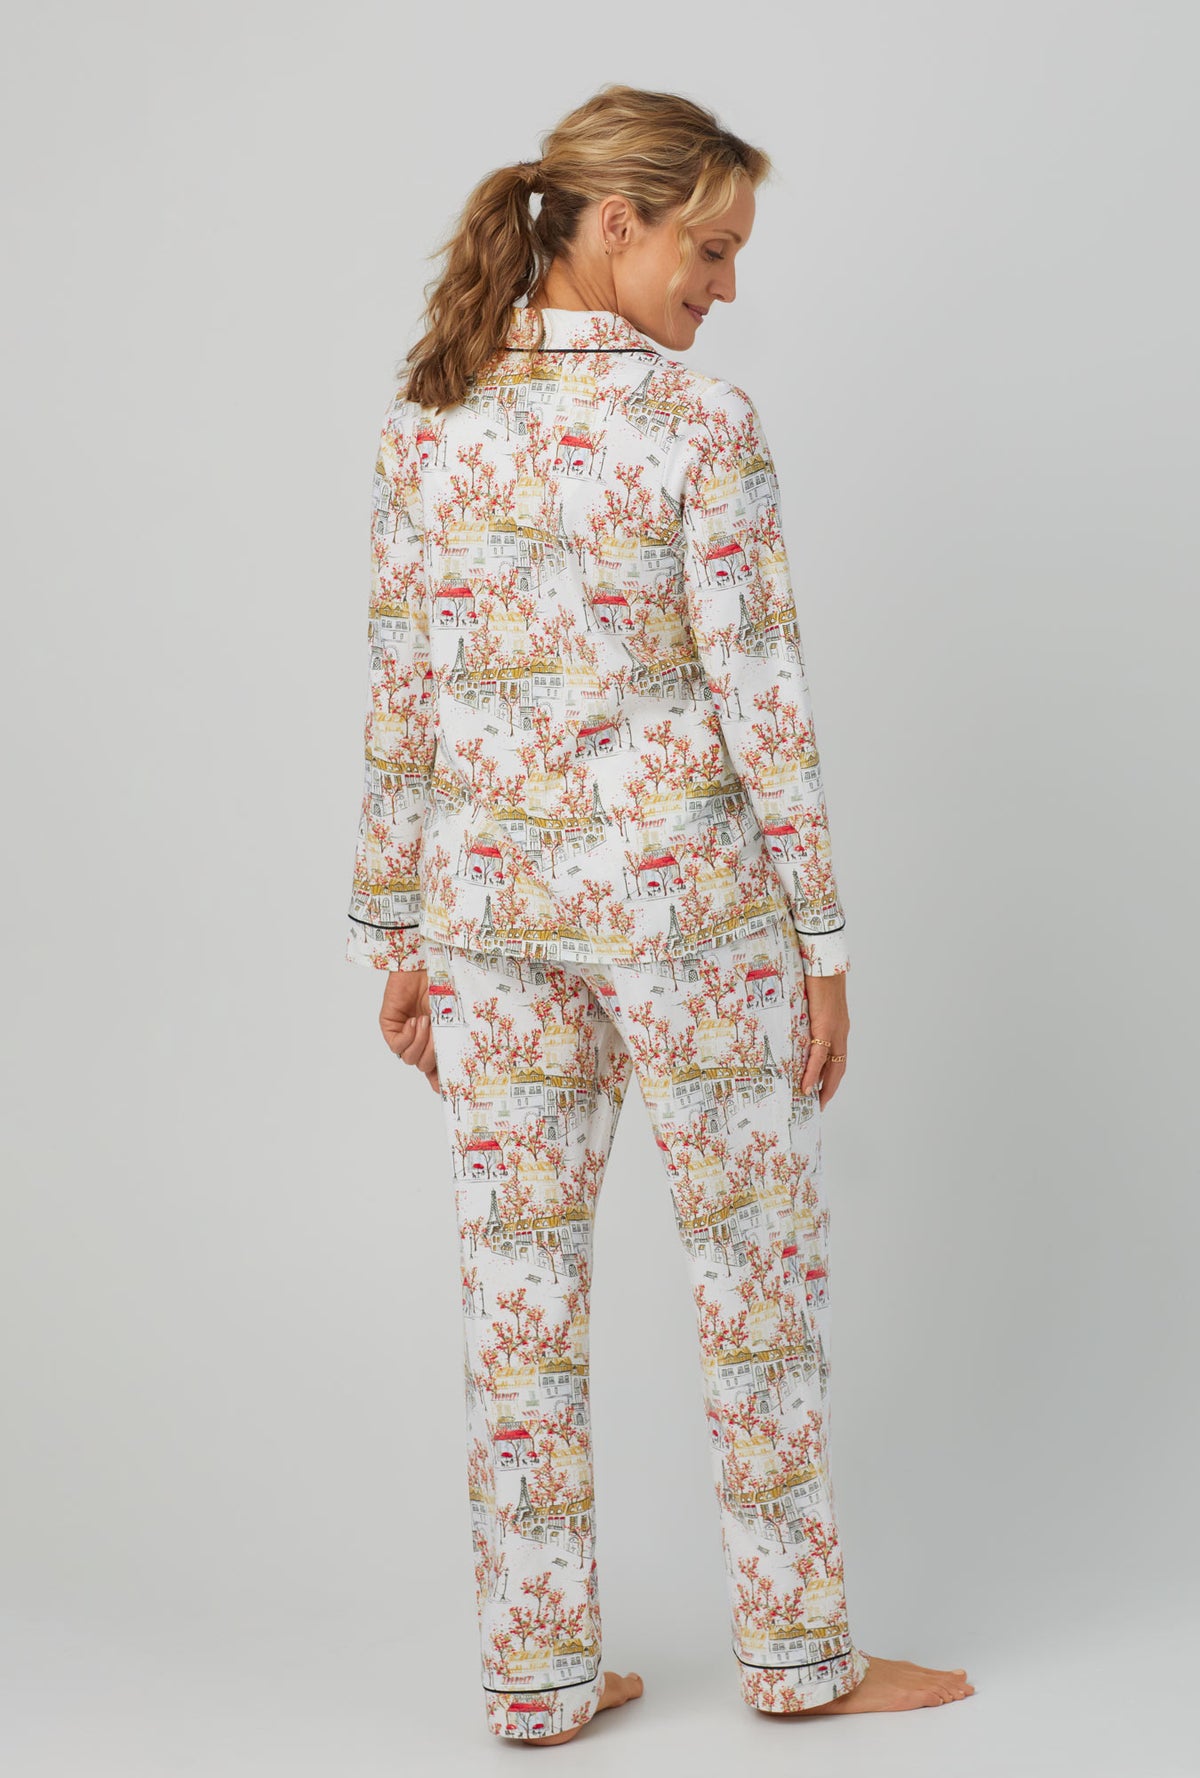 A lady wearing long sleeve classic stretch jersey pj set with fall in paris print.